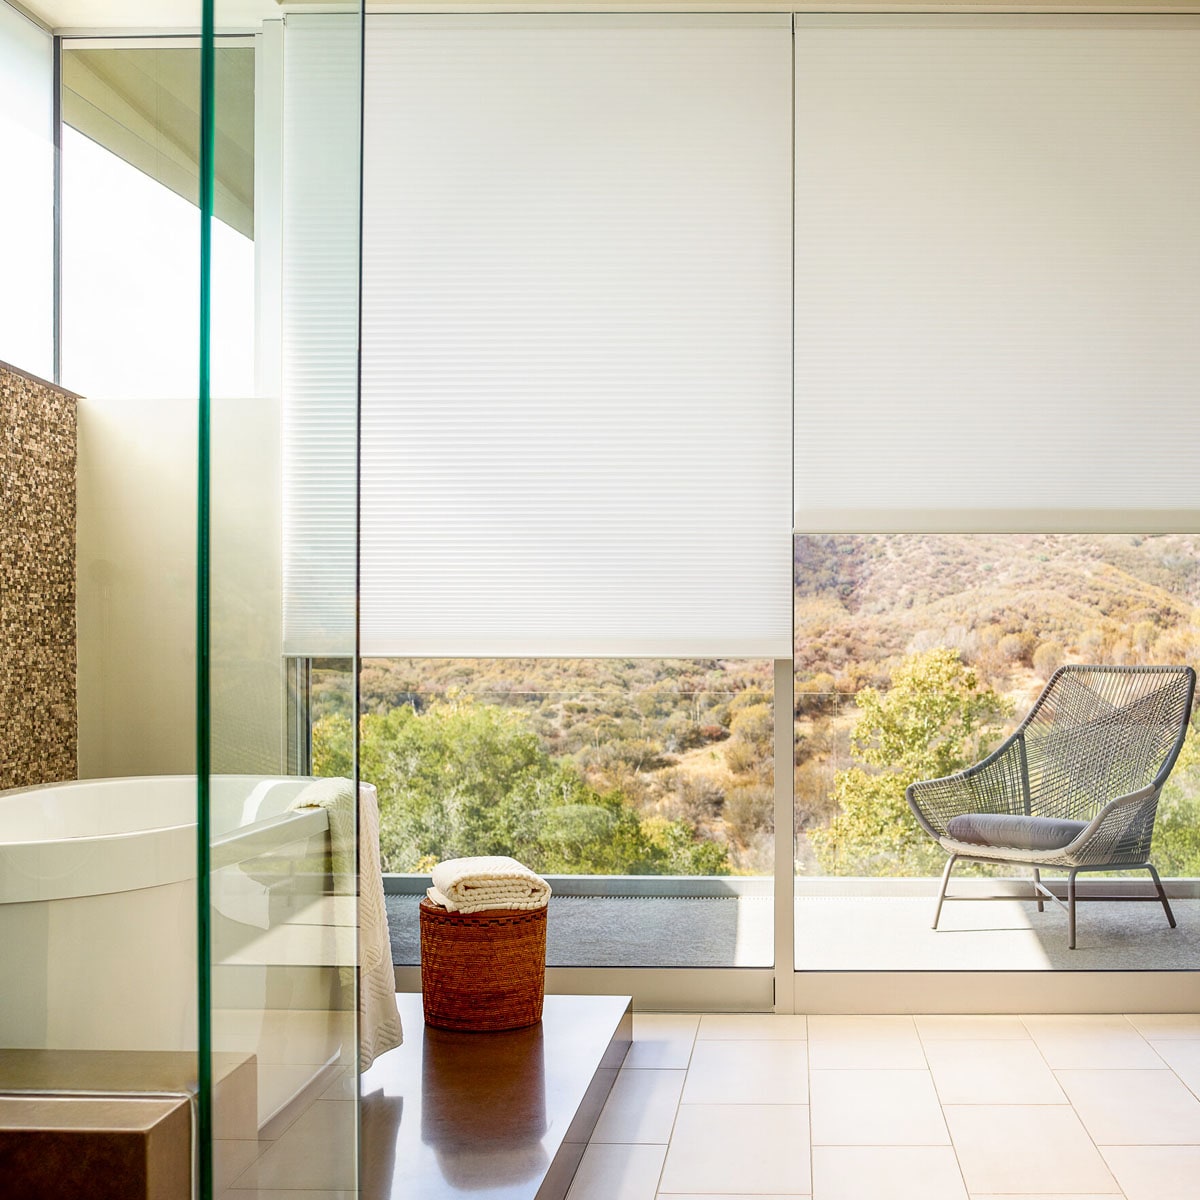 Roller shades providing privacy in a bathroom